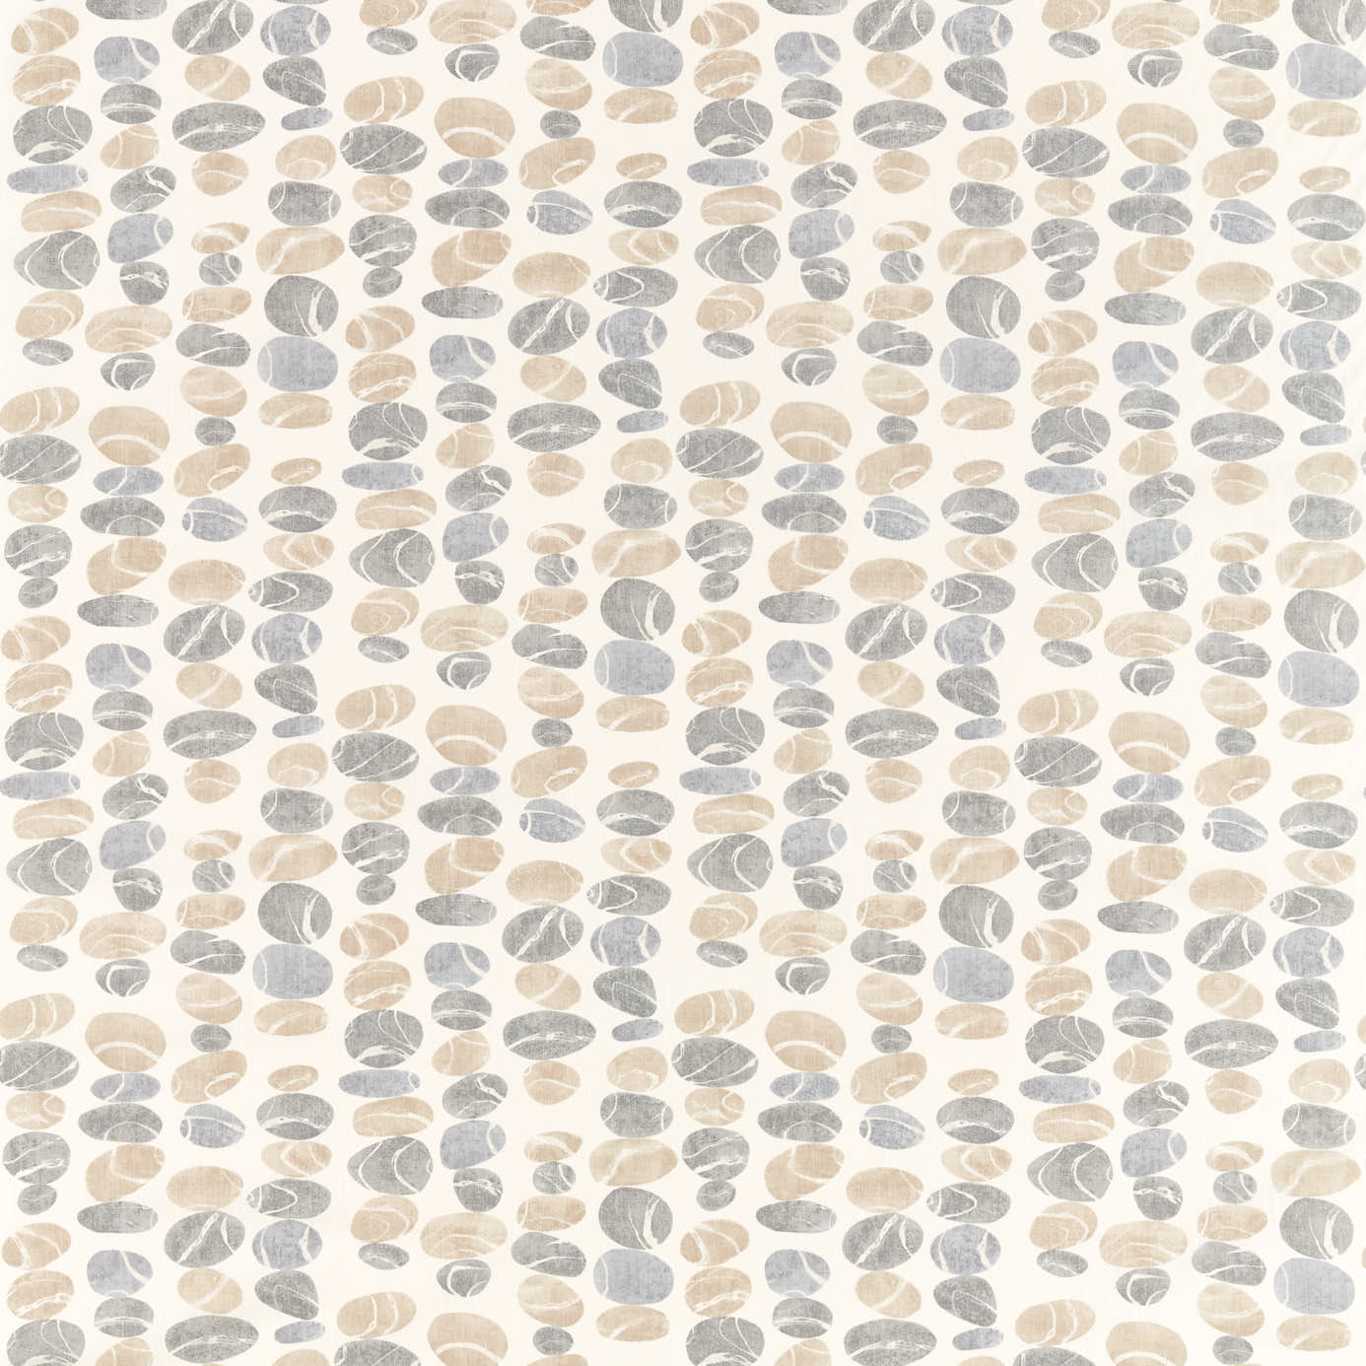 Stacking Pebbles Fabric by Sanderson Home